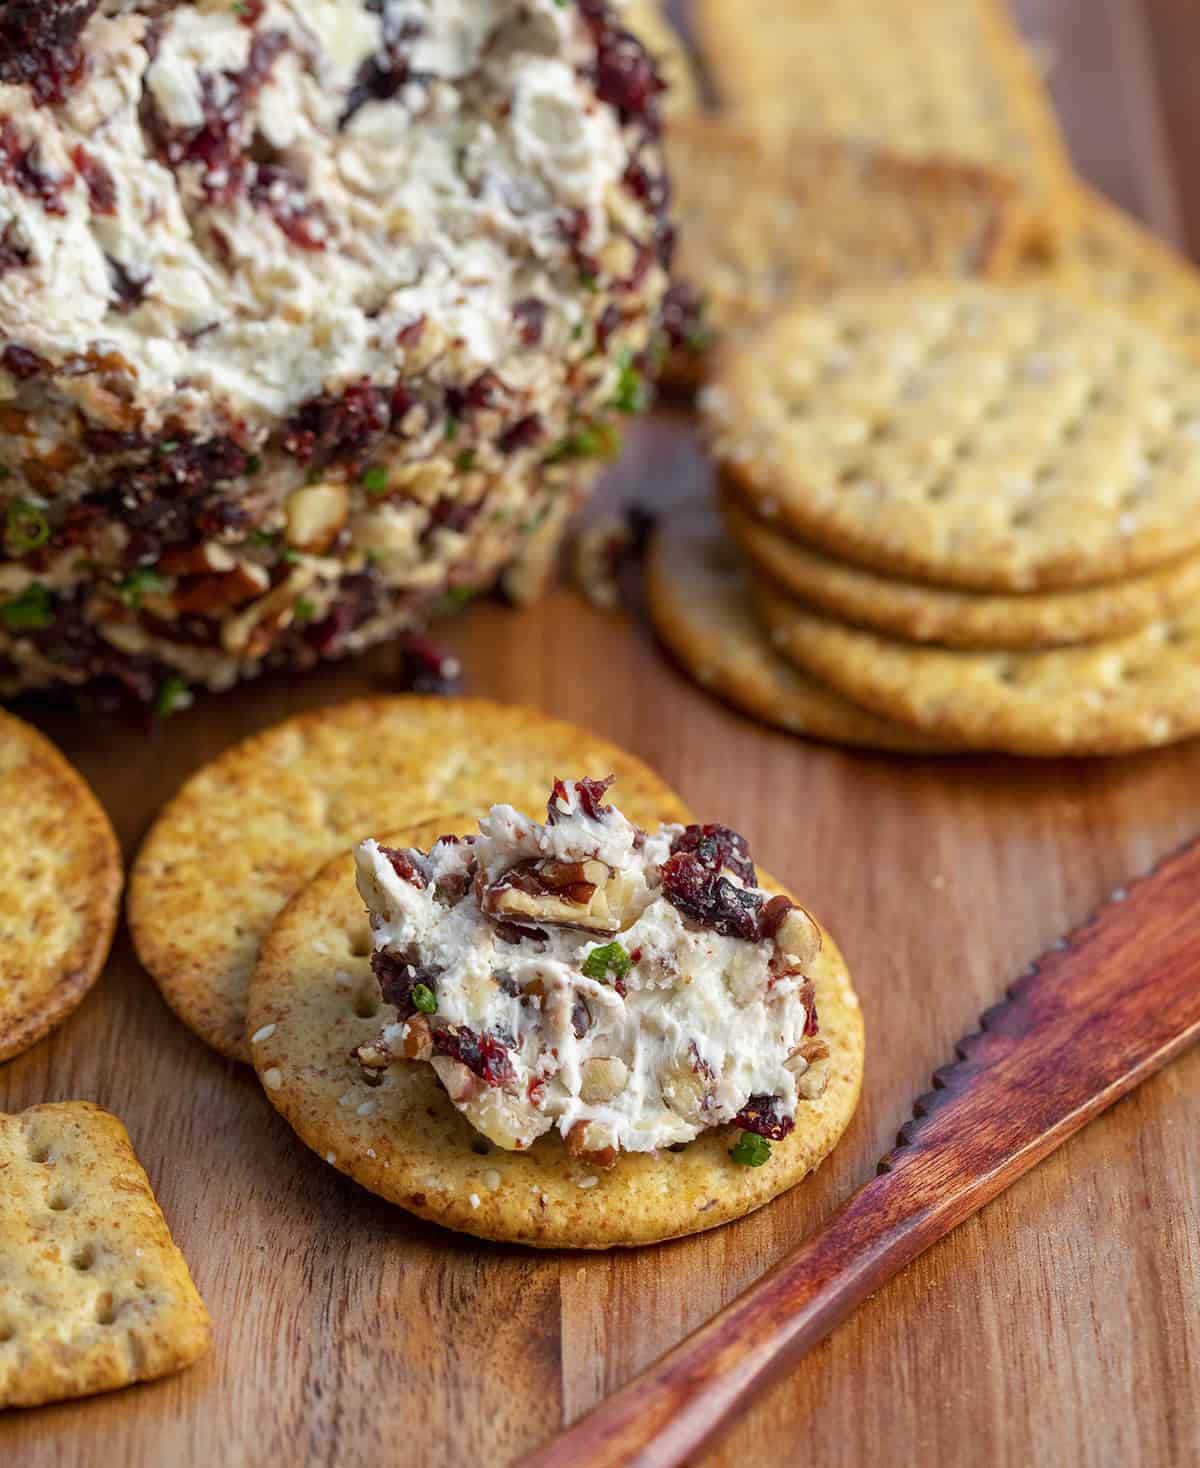 Cranberry Pecan Cheese Ball Spread on a Cracker Next to a Wooden Knife.